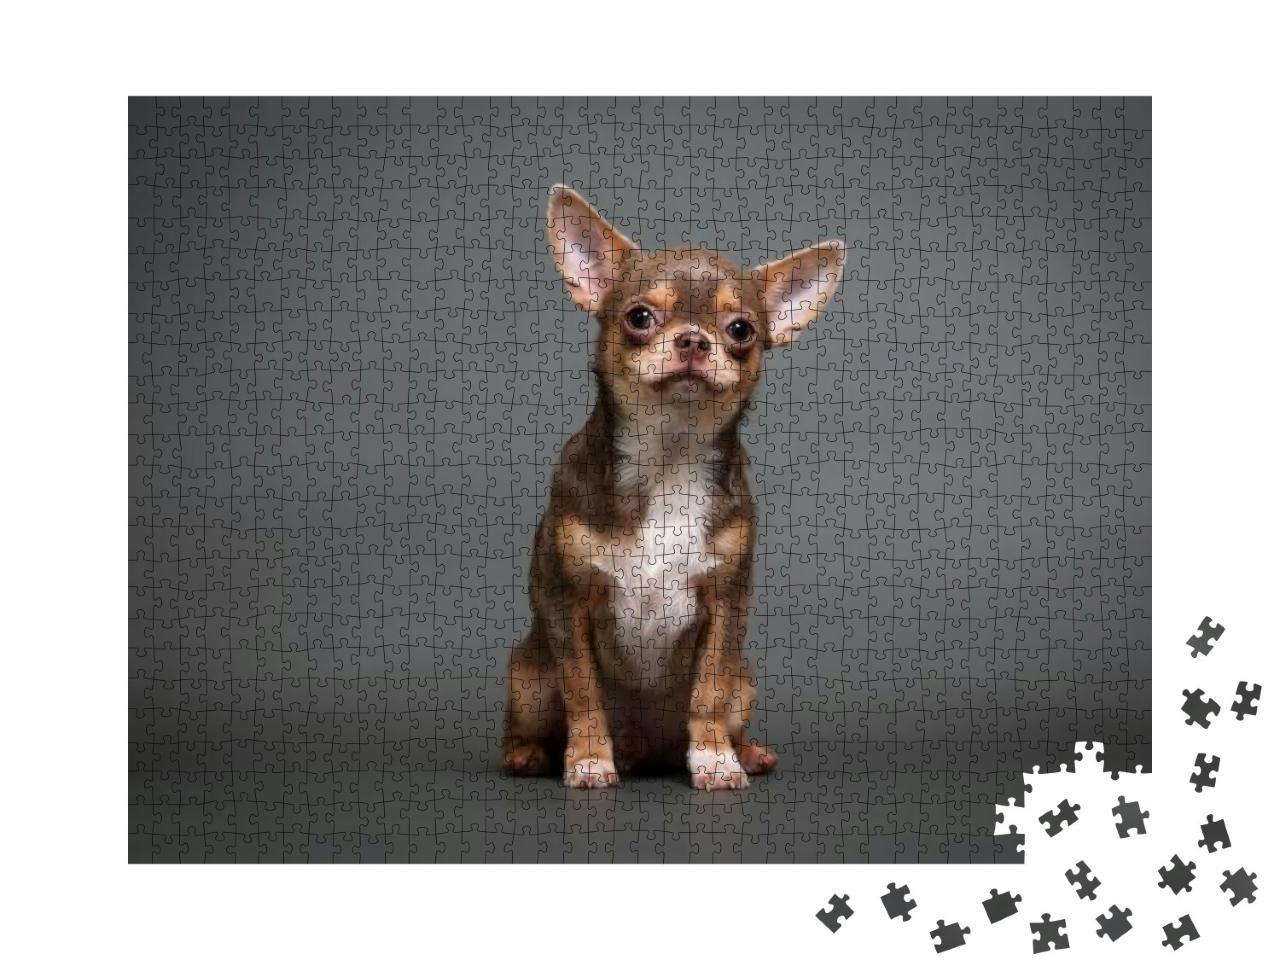 Chihuahua Puppy on a Gray Background Studio Photo... Jigsaw Puzzle with 1000 pieces